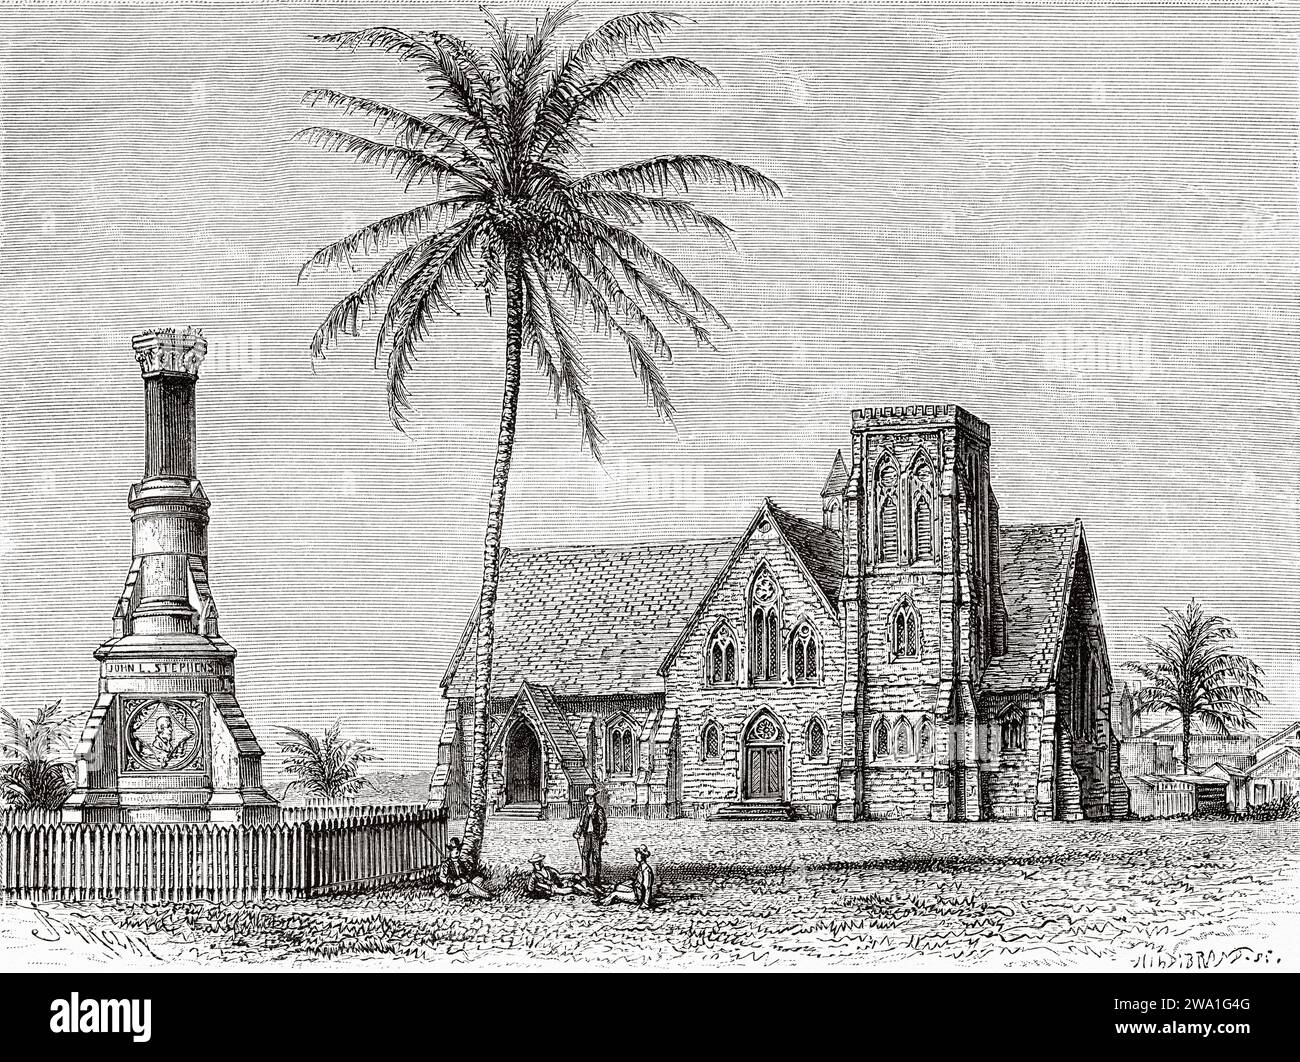 Protestant temple and monument to John Lloyd Stephens, Colon, Republic of Panama. Central America. Explorations in the Isthmus of Panama and Darien 1876-1878 by Armand Reclus (1843 - 1927) Old 19th century engraving from Le Tour du Monde 1880 Stock Photo